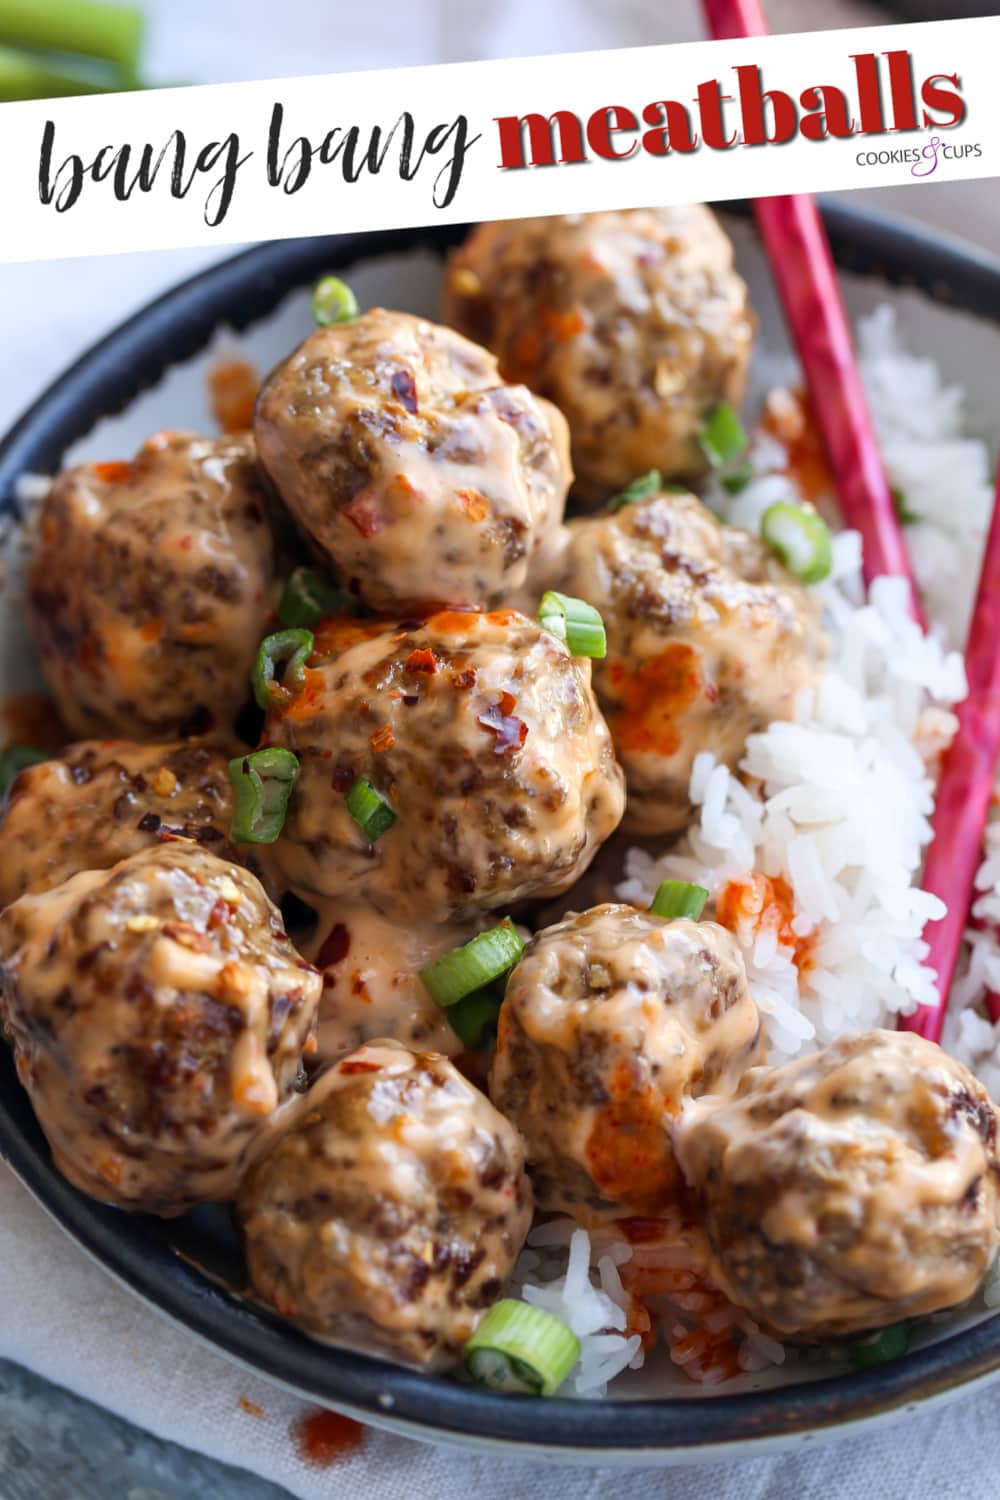 Sweet and Spicy Bang Bang Meatballs | Cookies and Cups